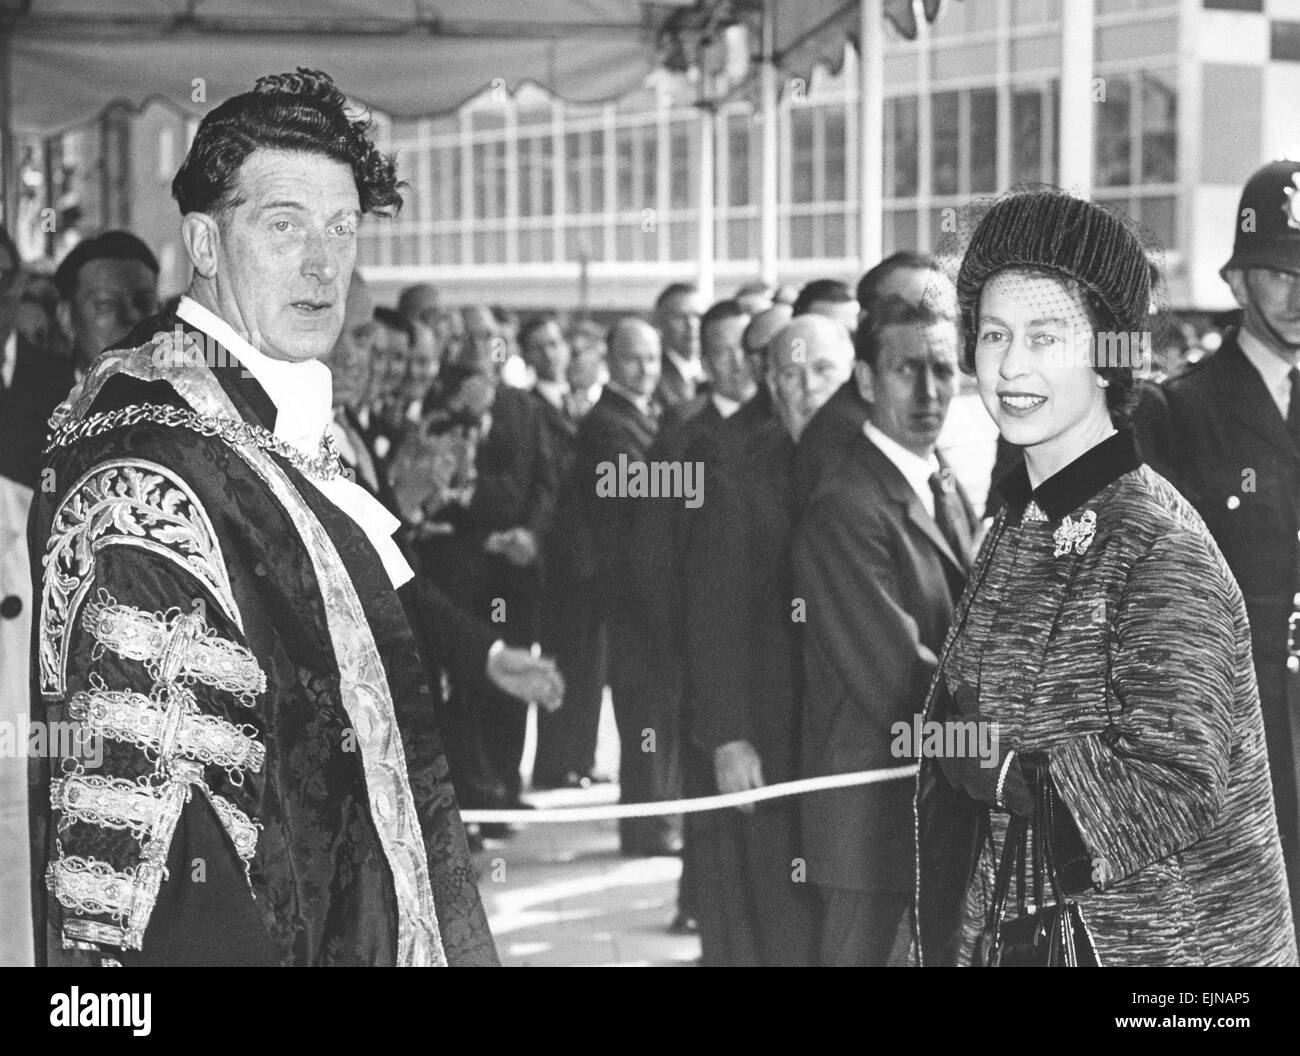 Queen Elizabeth II's visit to Coventry for the consecration of the new cathedral. She is seen here with the Lord Mayor, Alderman Arthur Waugh, at Coventry Railway station. 25th May 1962 Stock Photo